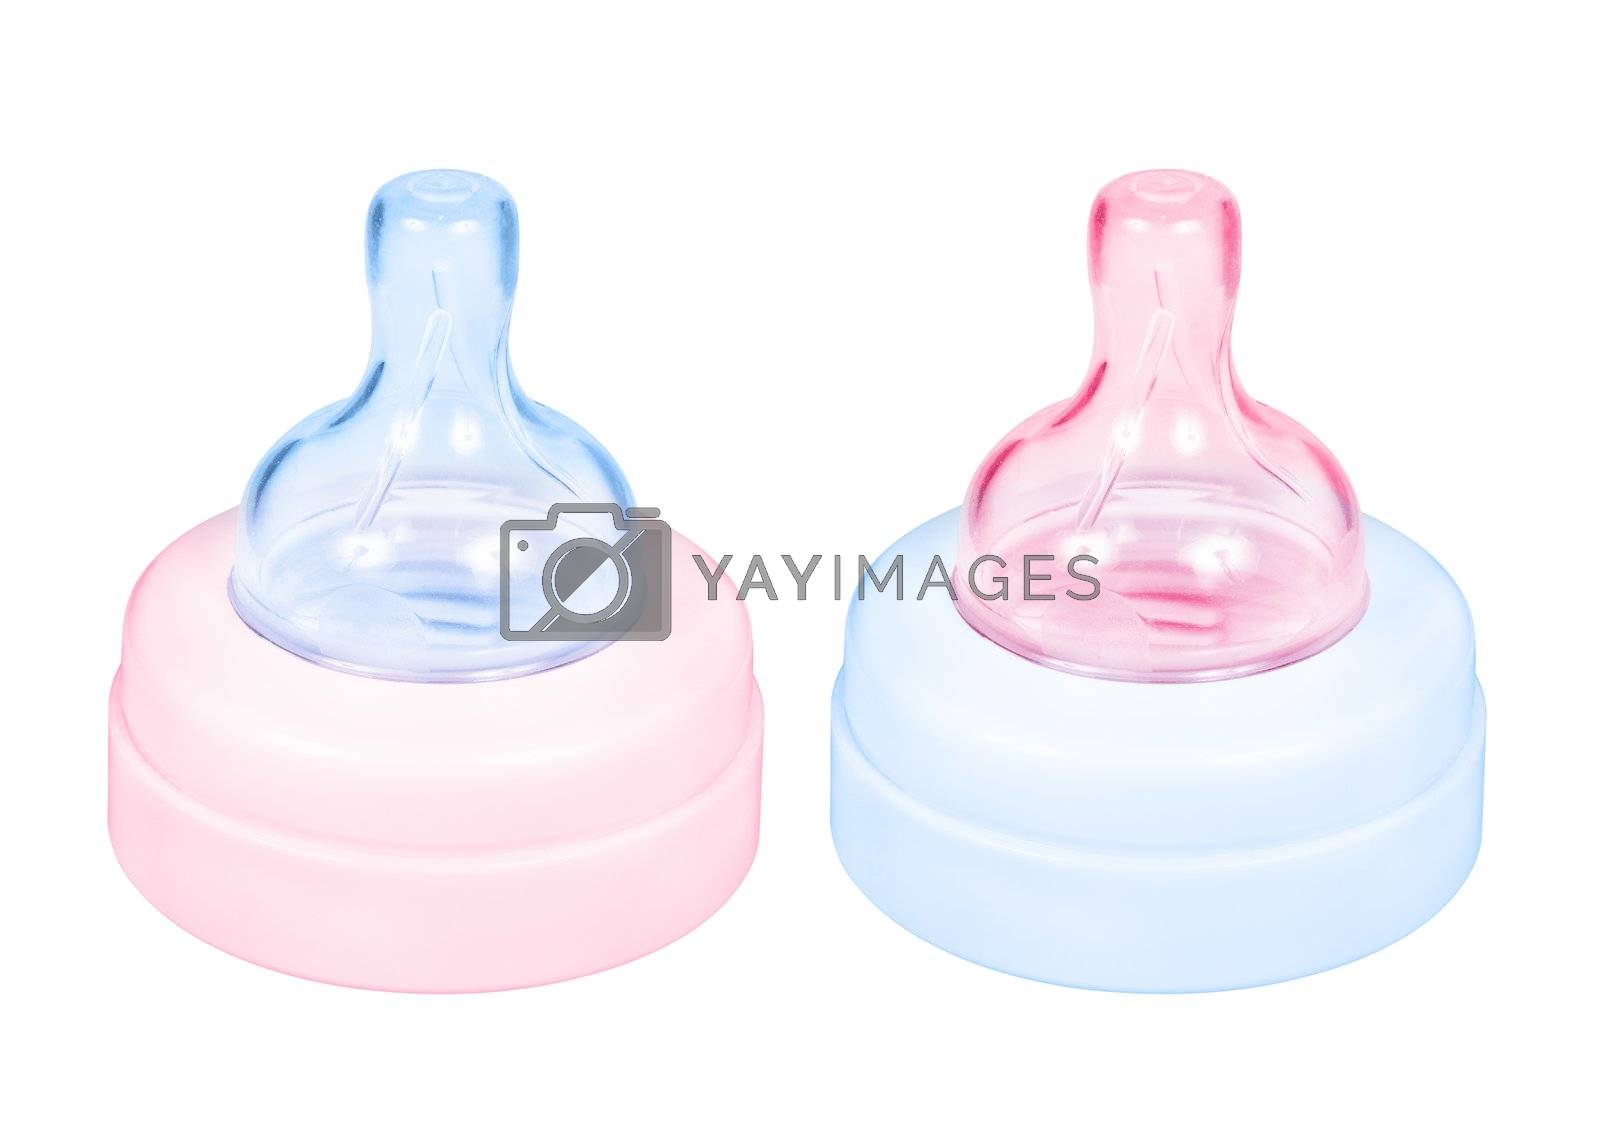 Royalty free image of Baby bottle cap pink and blue by grauvision